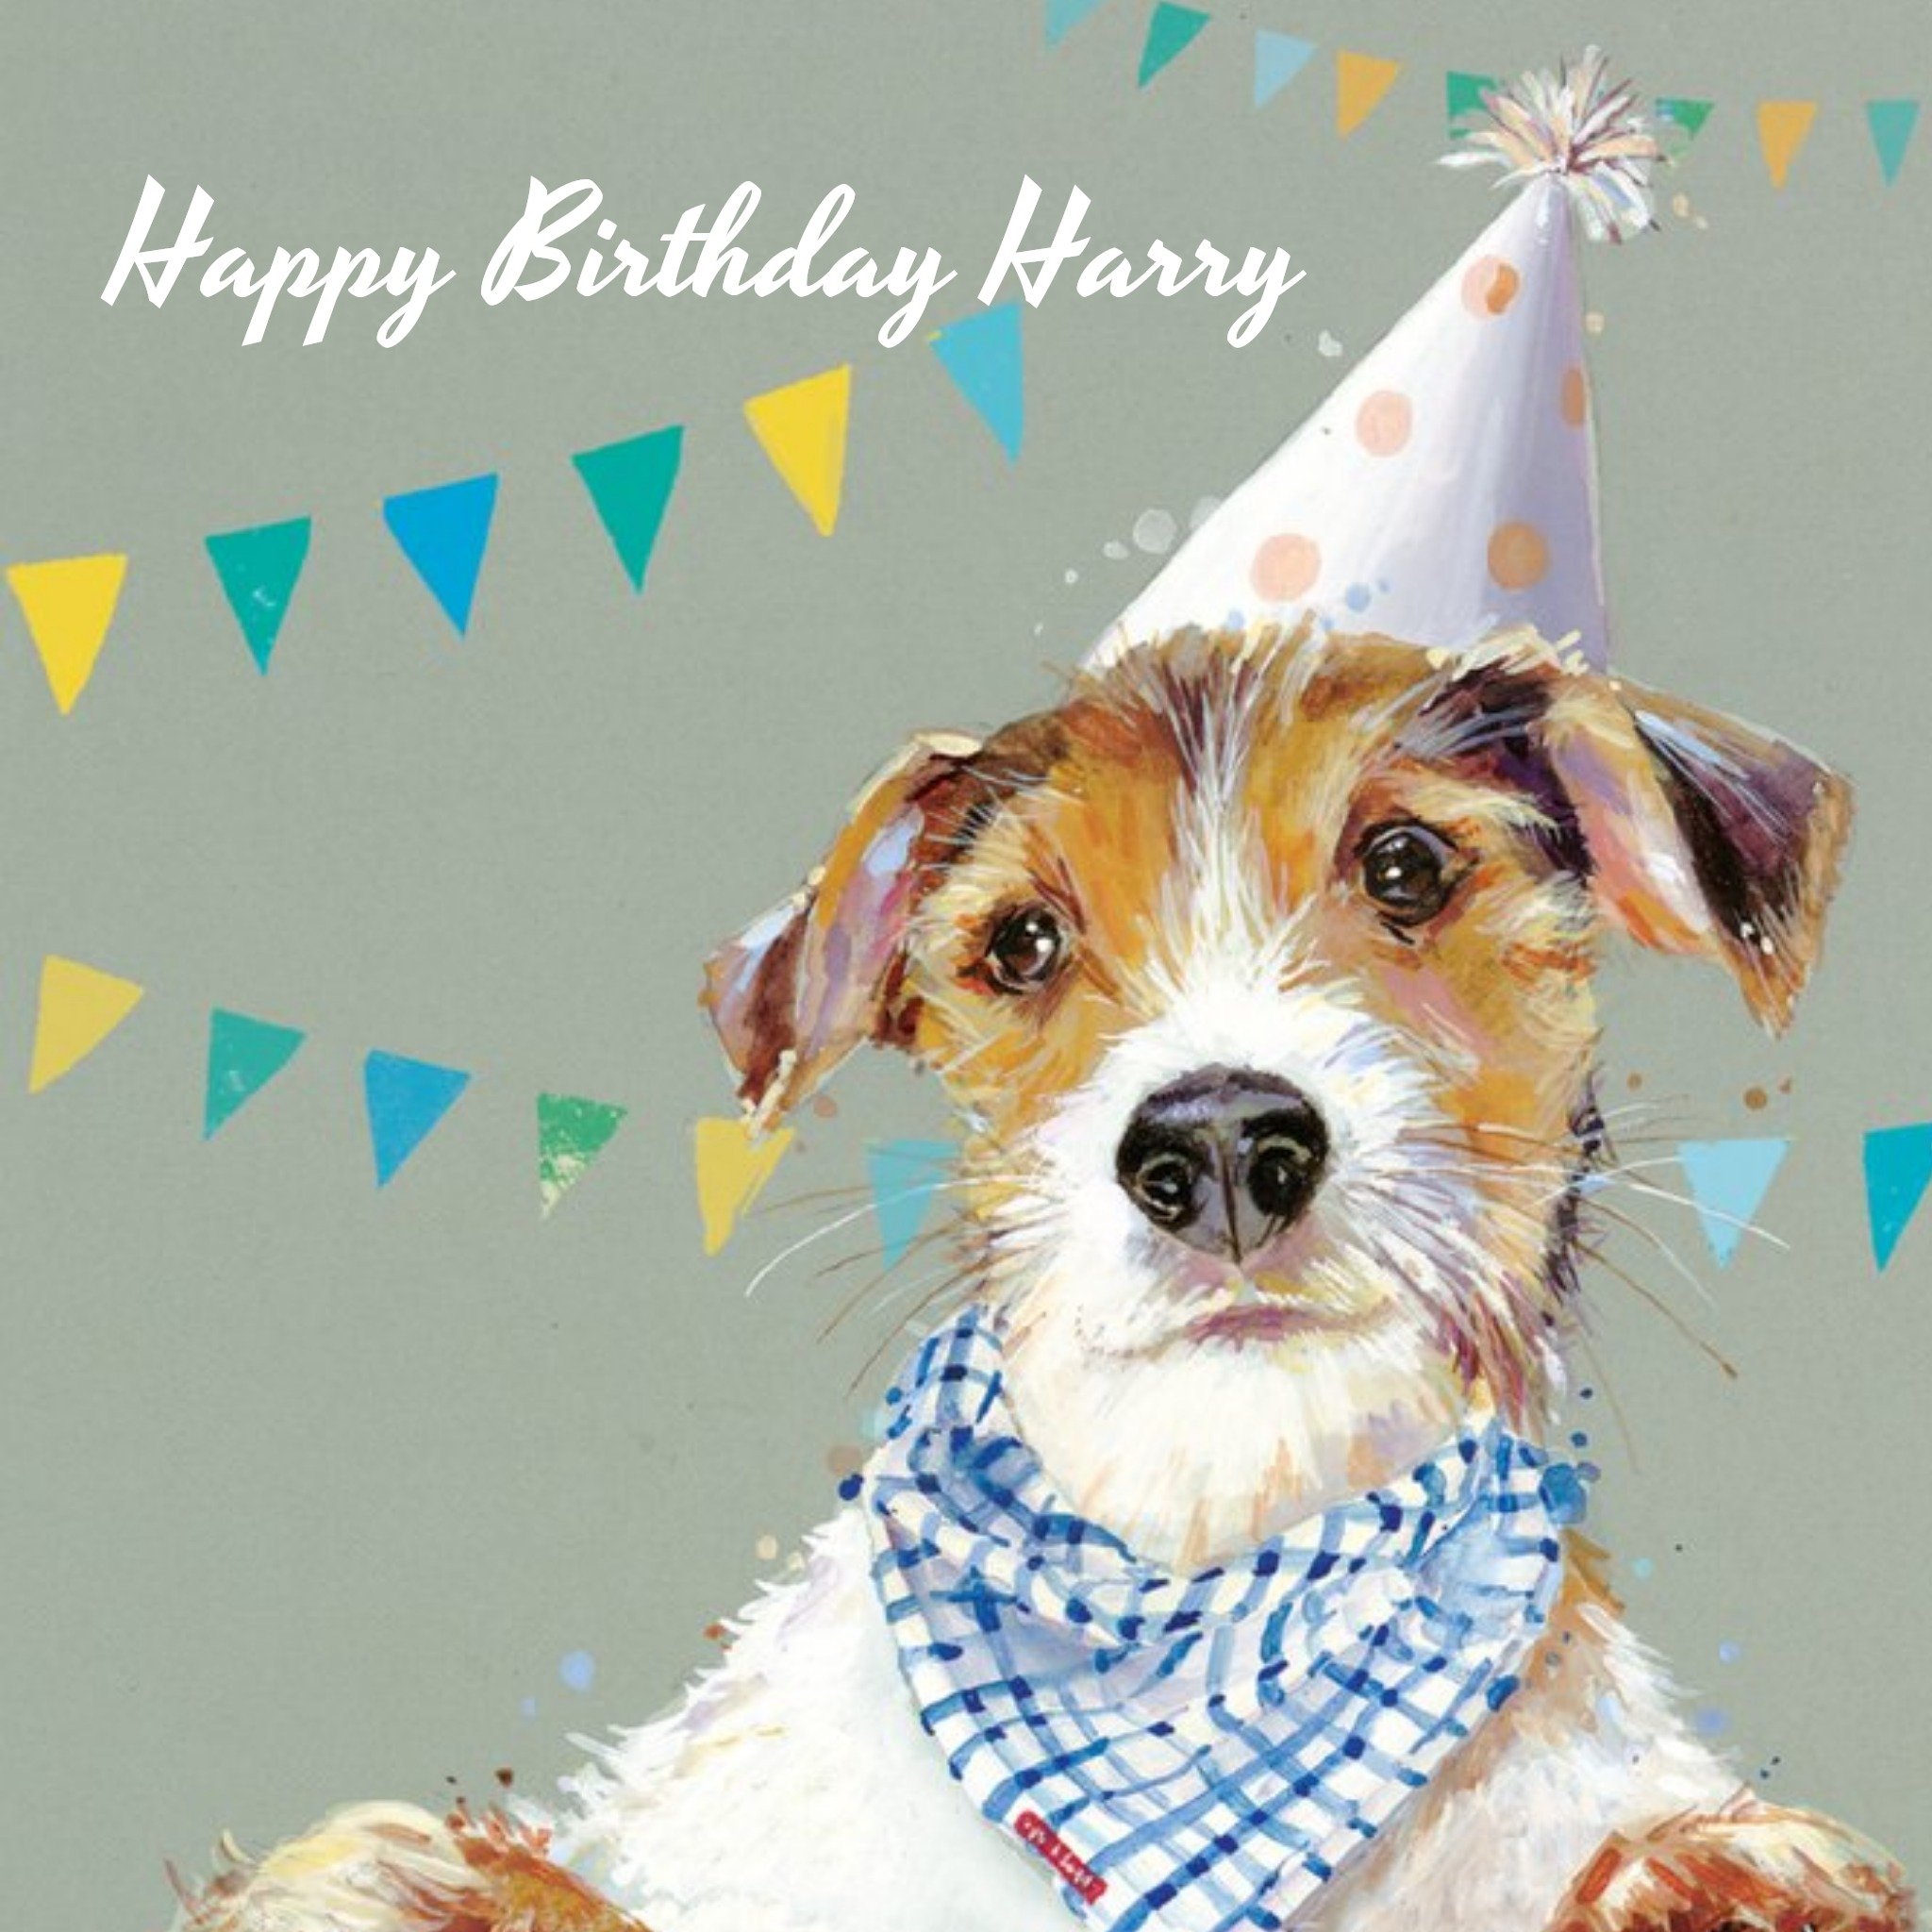 Ling Design Doggie Ready To Celebrate Personalised Birthday Card, Large